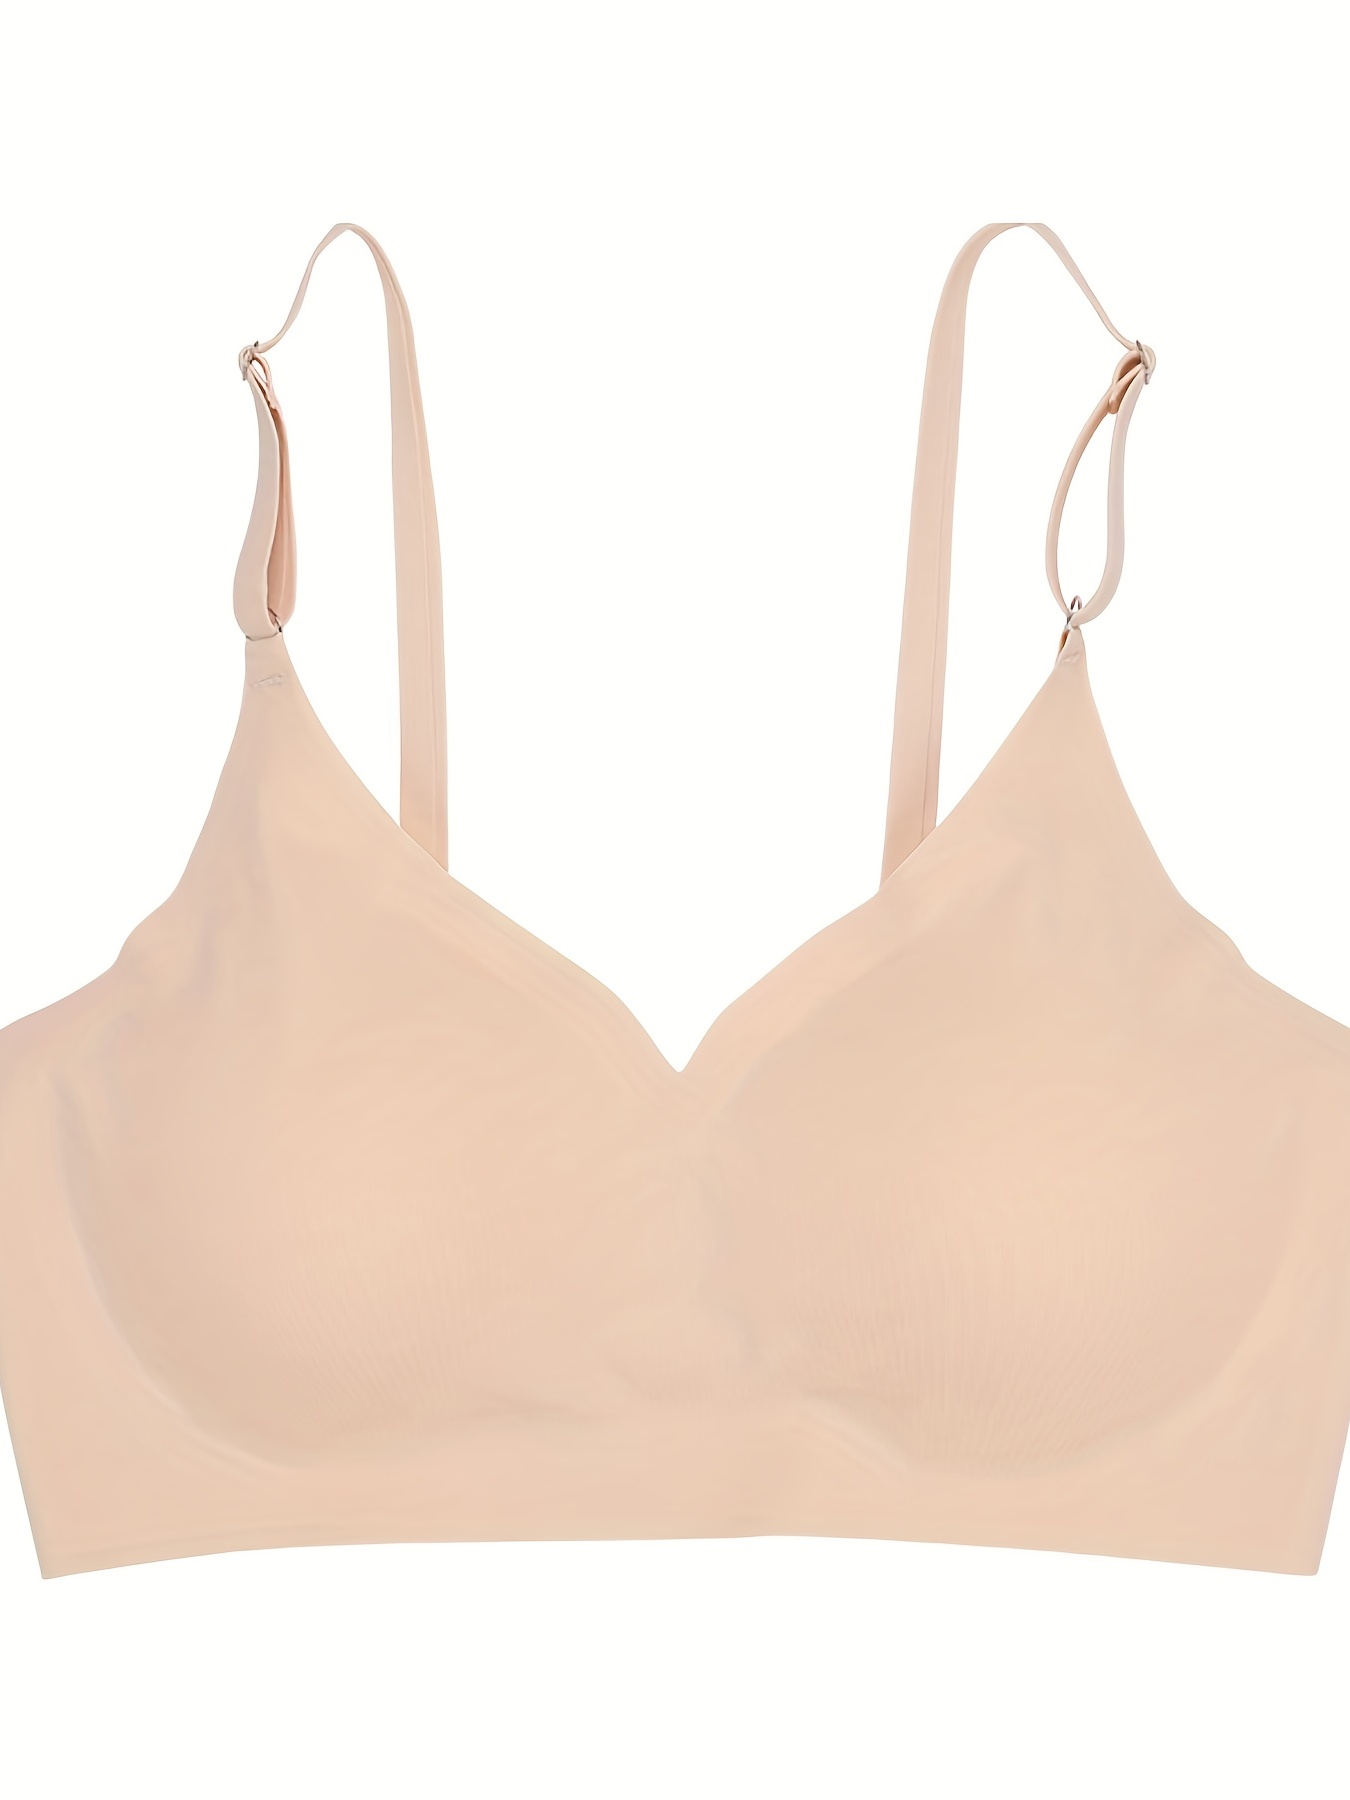 Non-underwired triangle bra, removable pads - YESTERDAY